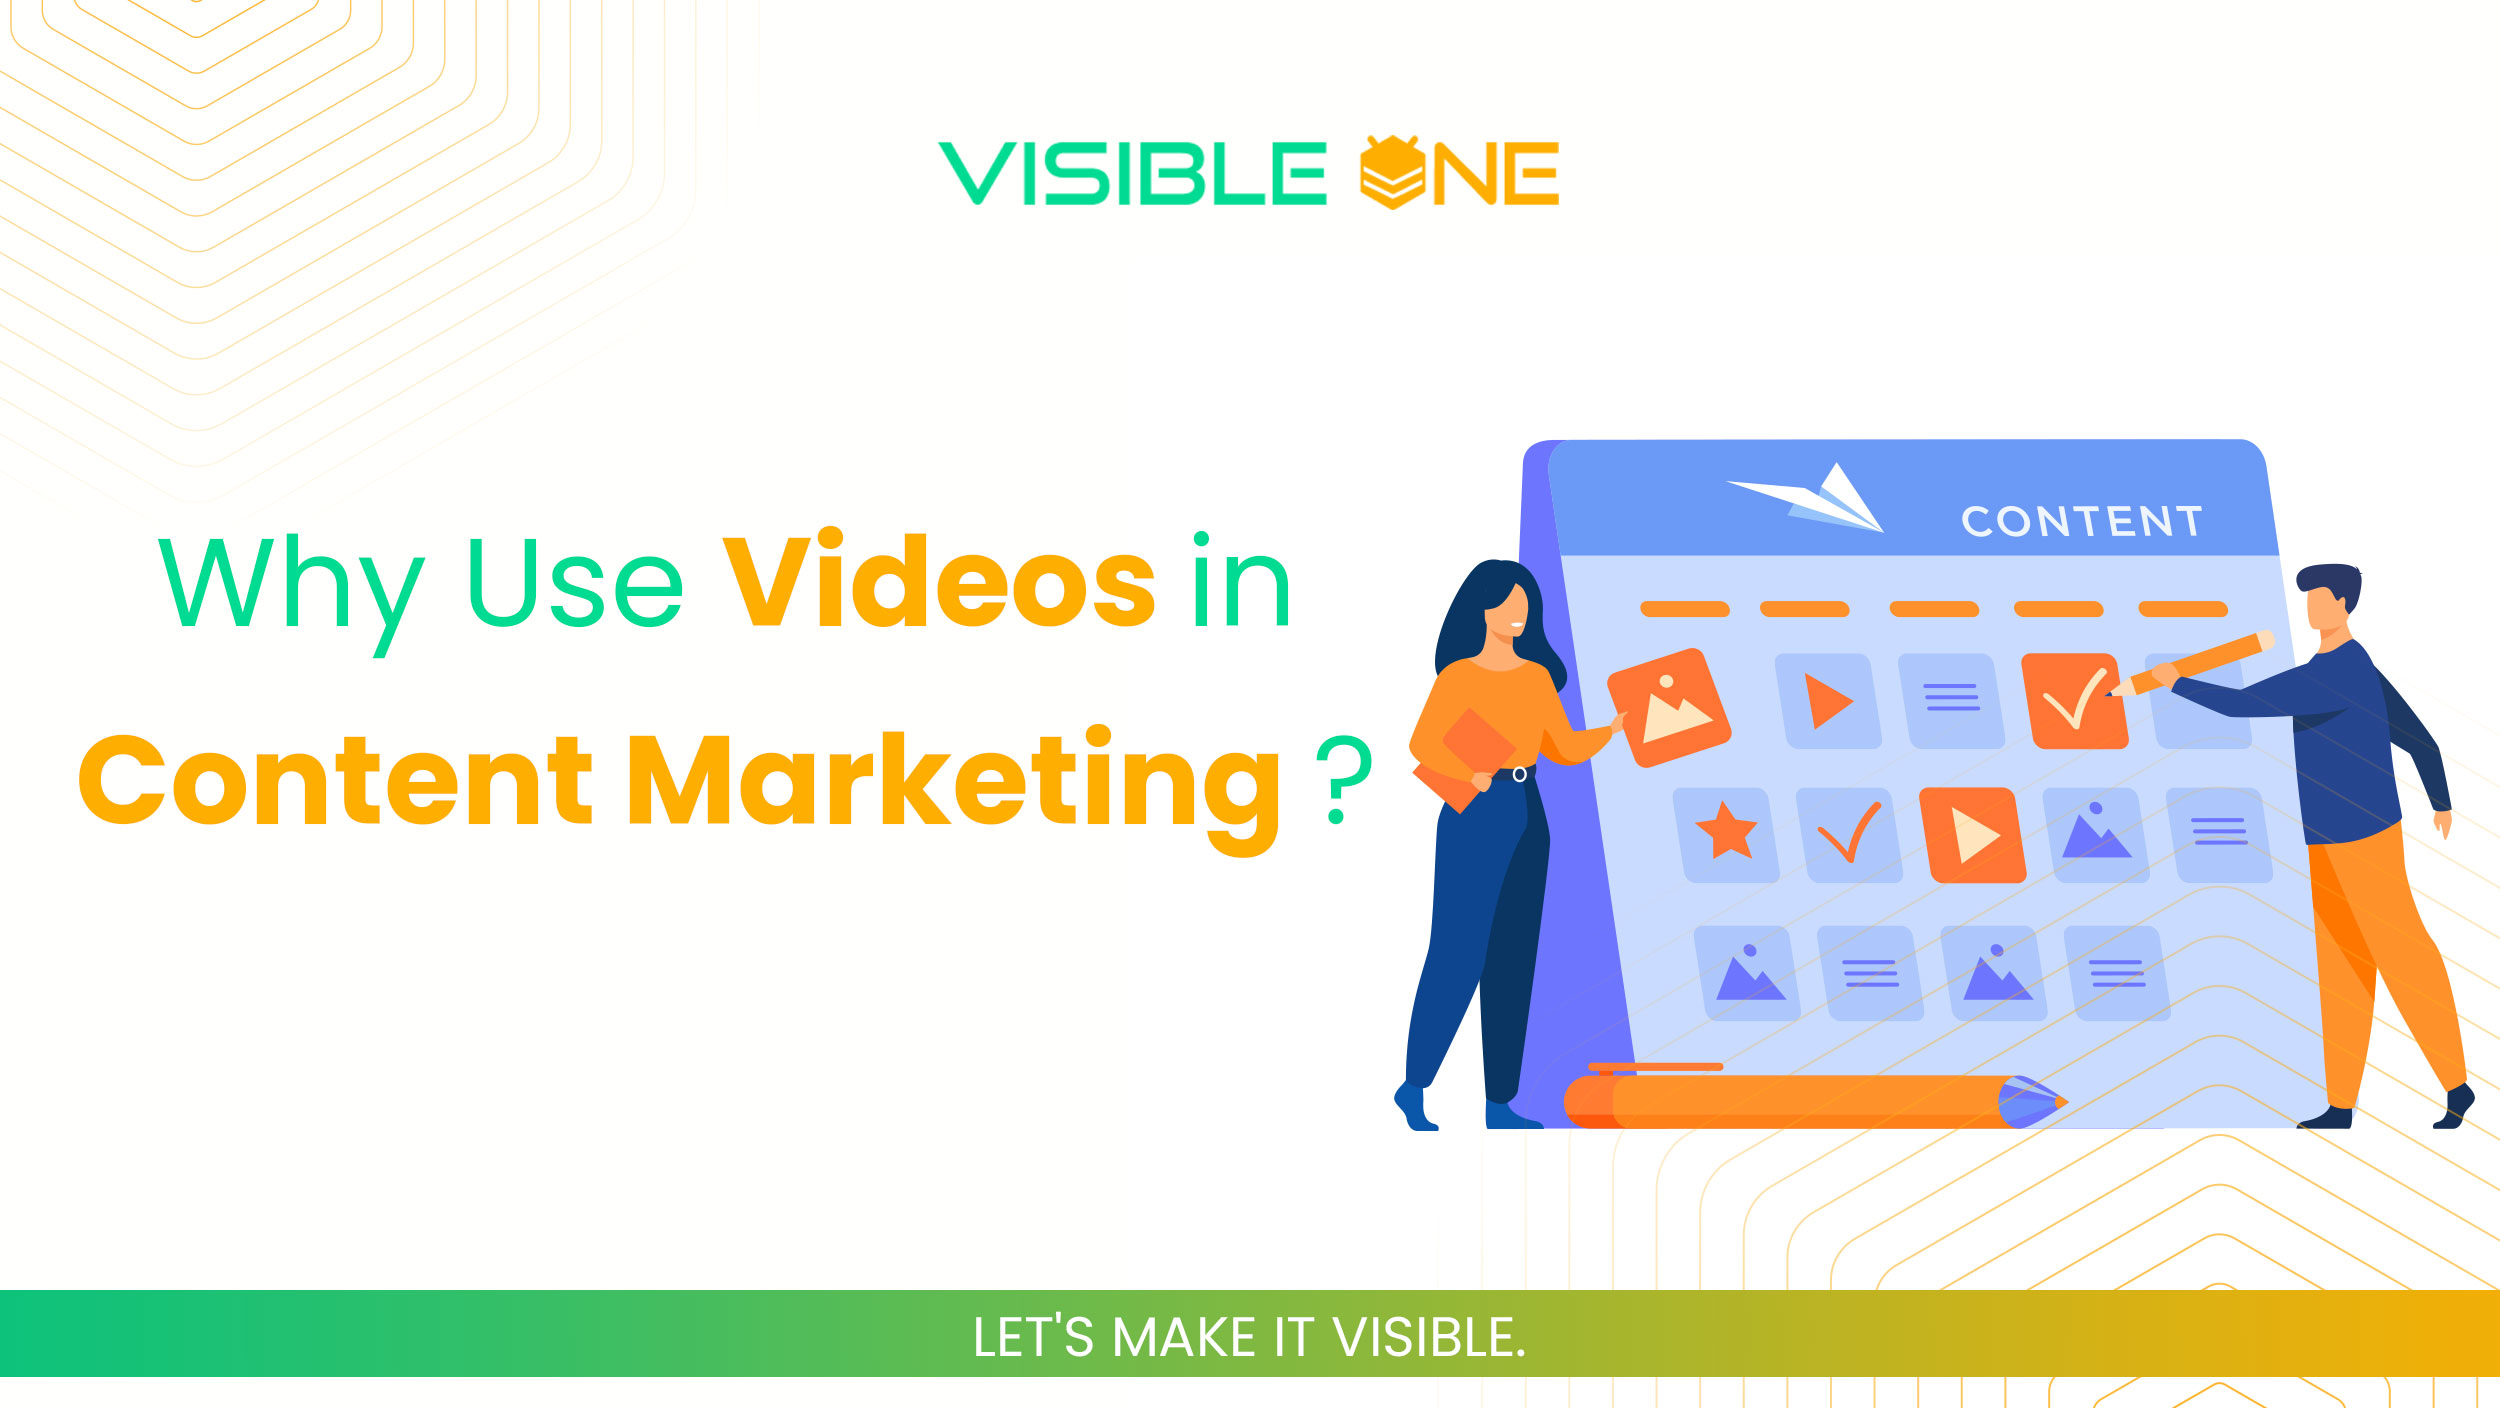 Why Use Videos in Content Marketing?